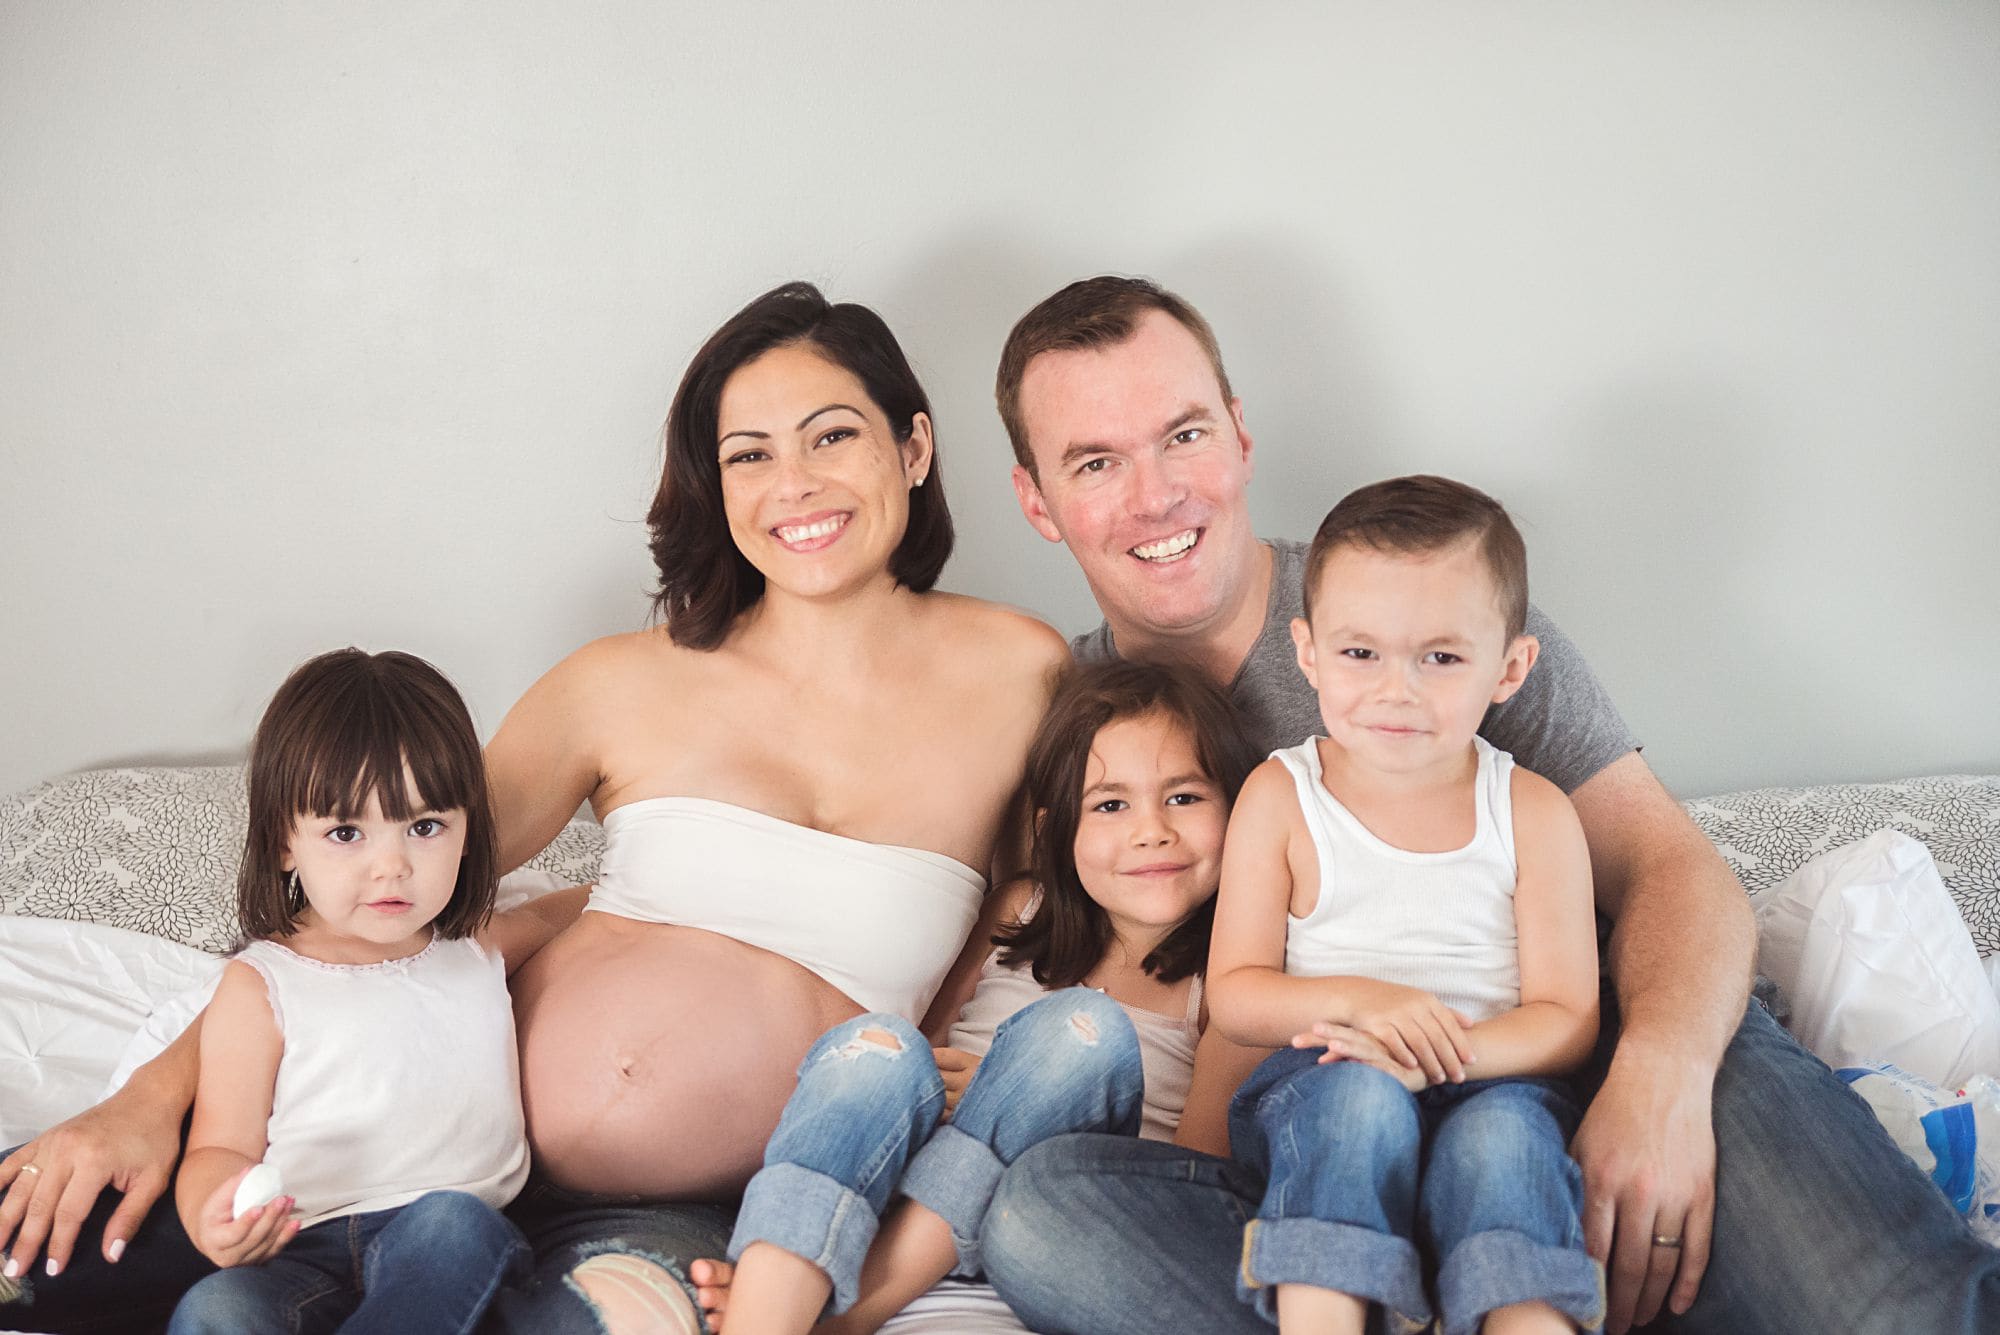 Studio style family maternity portrait with three children wearing denim and white